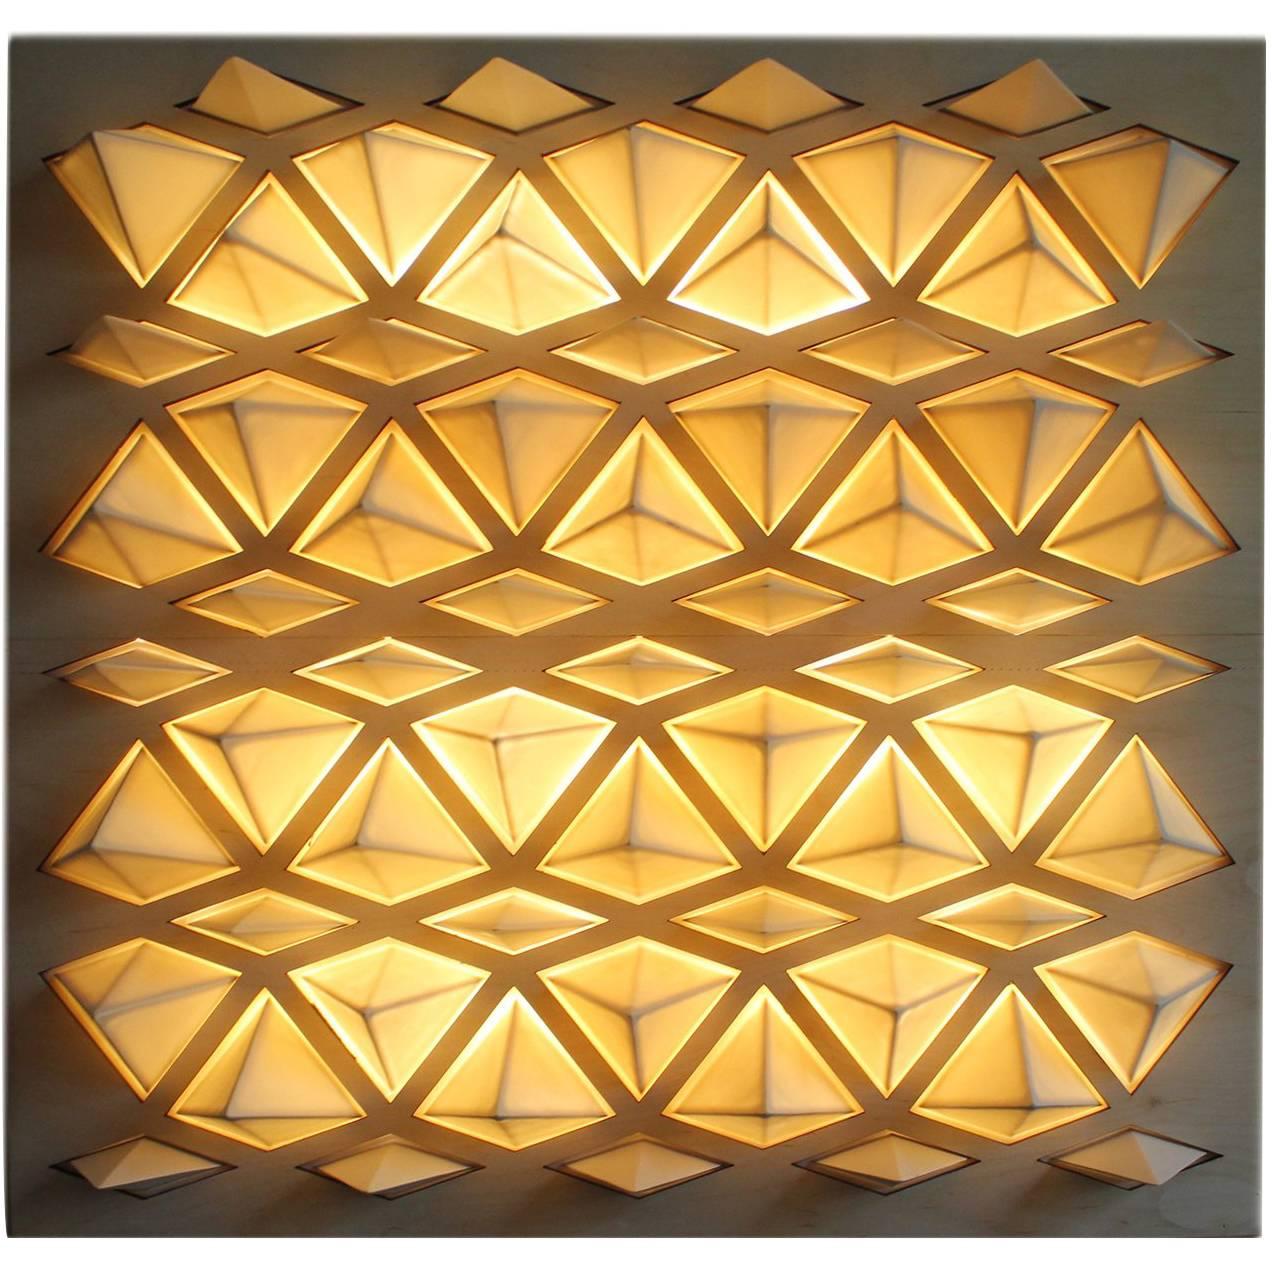 Wall Tile Installation Hanging Wall Lighting Contemporary Glazed Porcelain For Sale